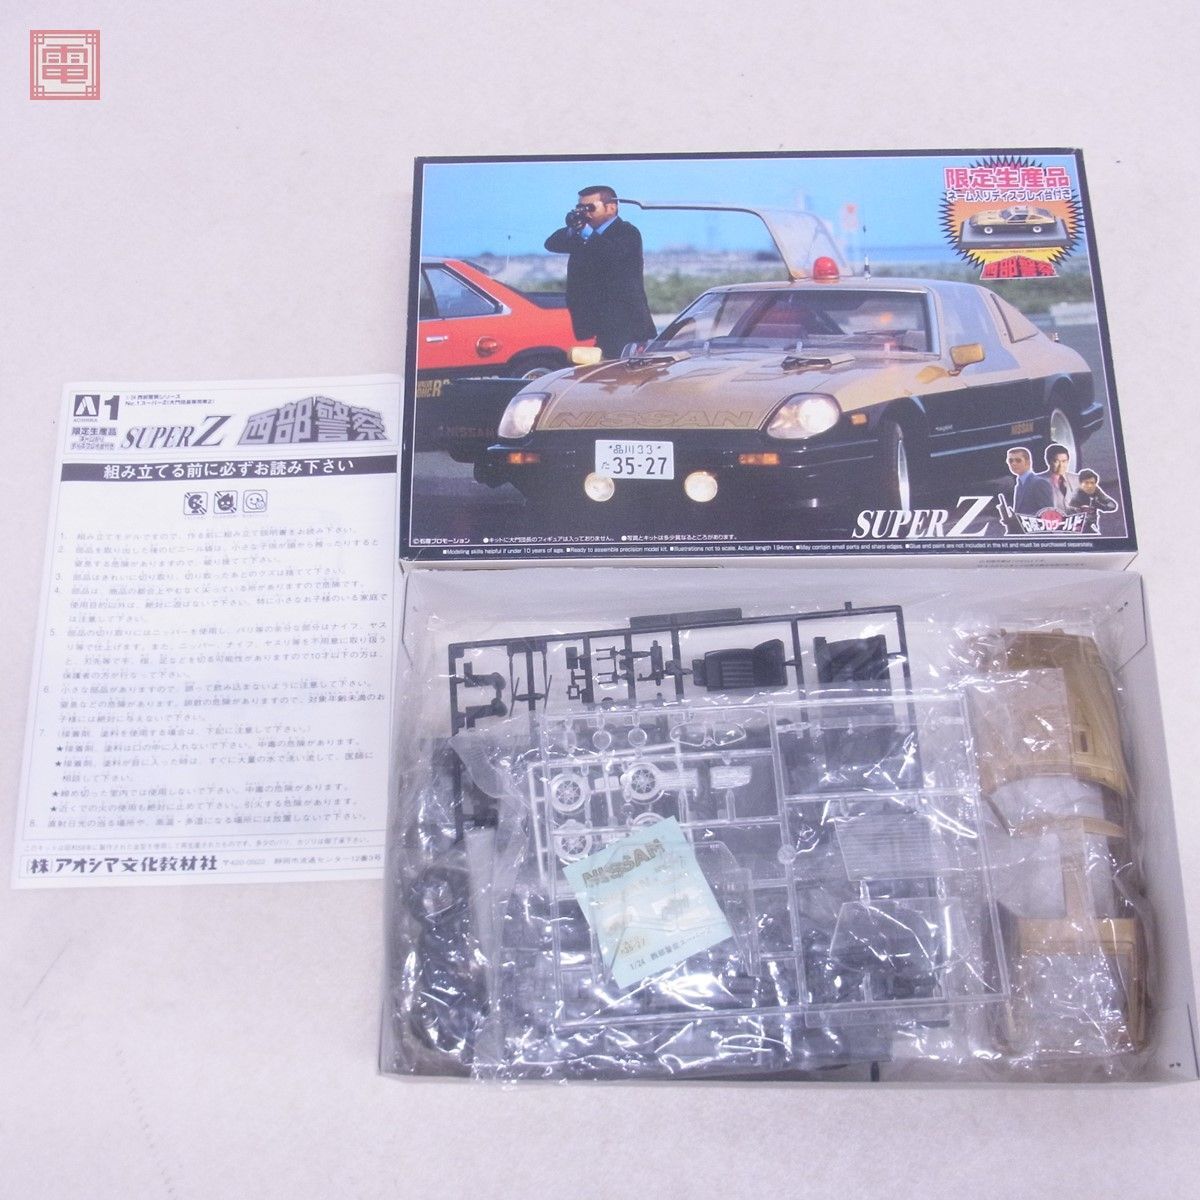  not yet constructed Aoshima 1/24 west part police Safari 4WD& tanker car / super Z( large .. length exclusive use car 2) limitated production goods together 2 piece set AOSHIMA stone . Pro [20